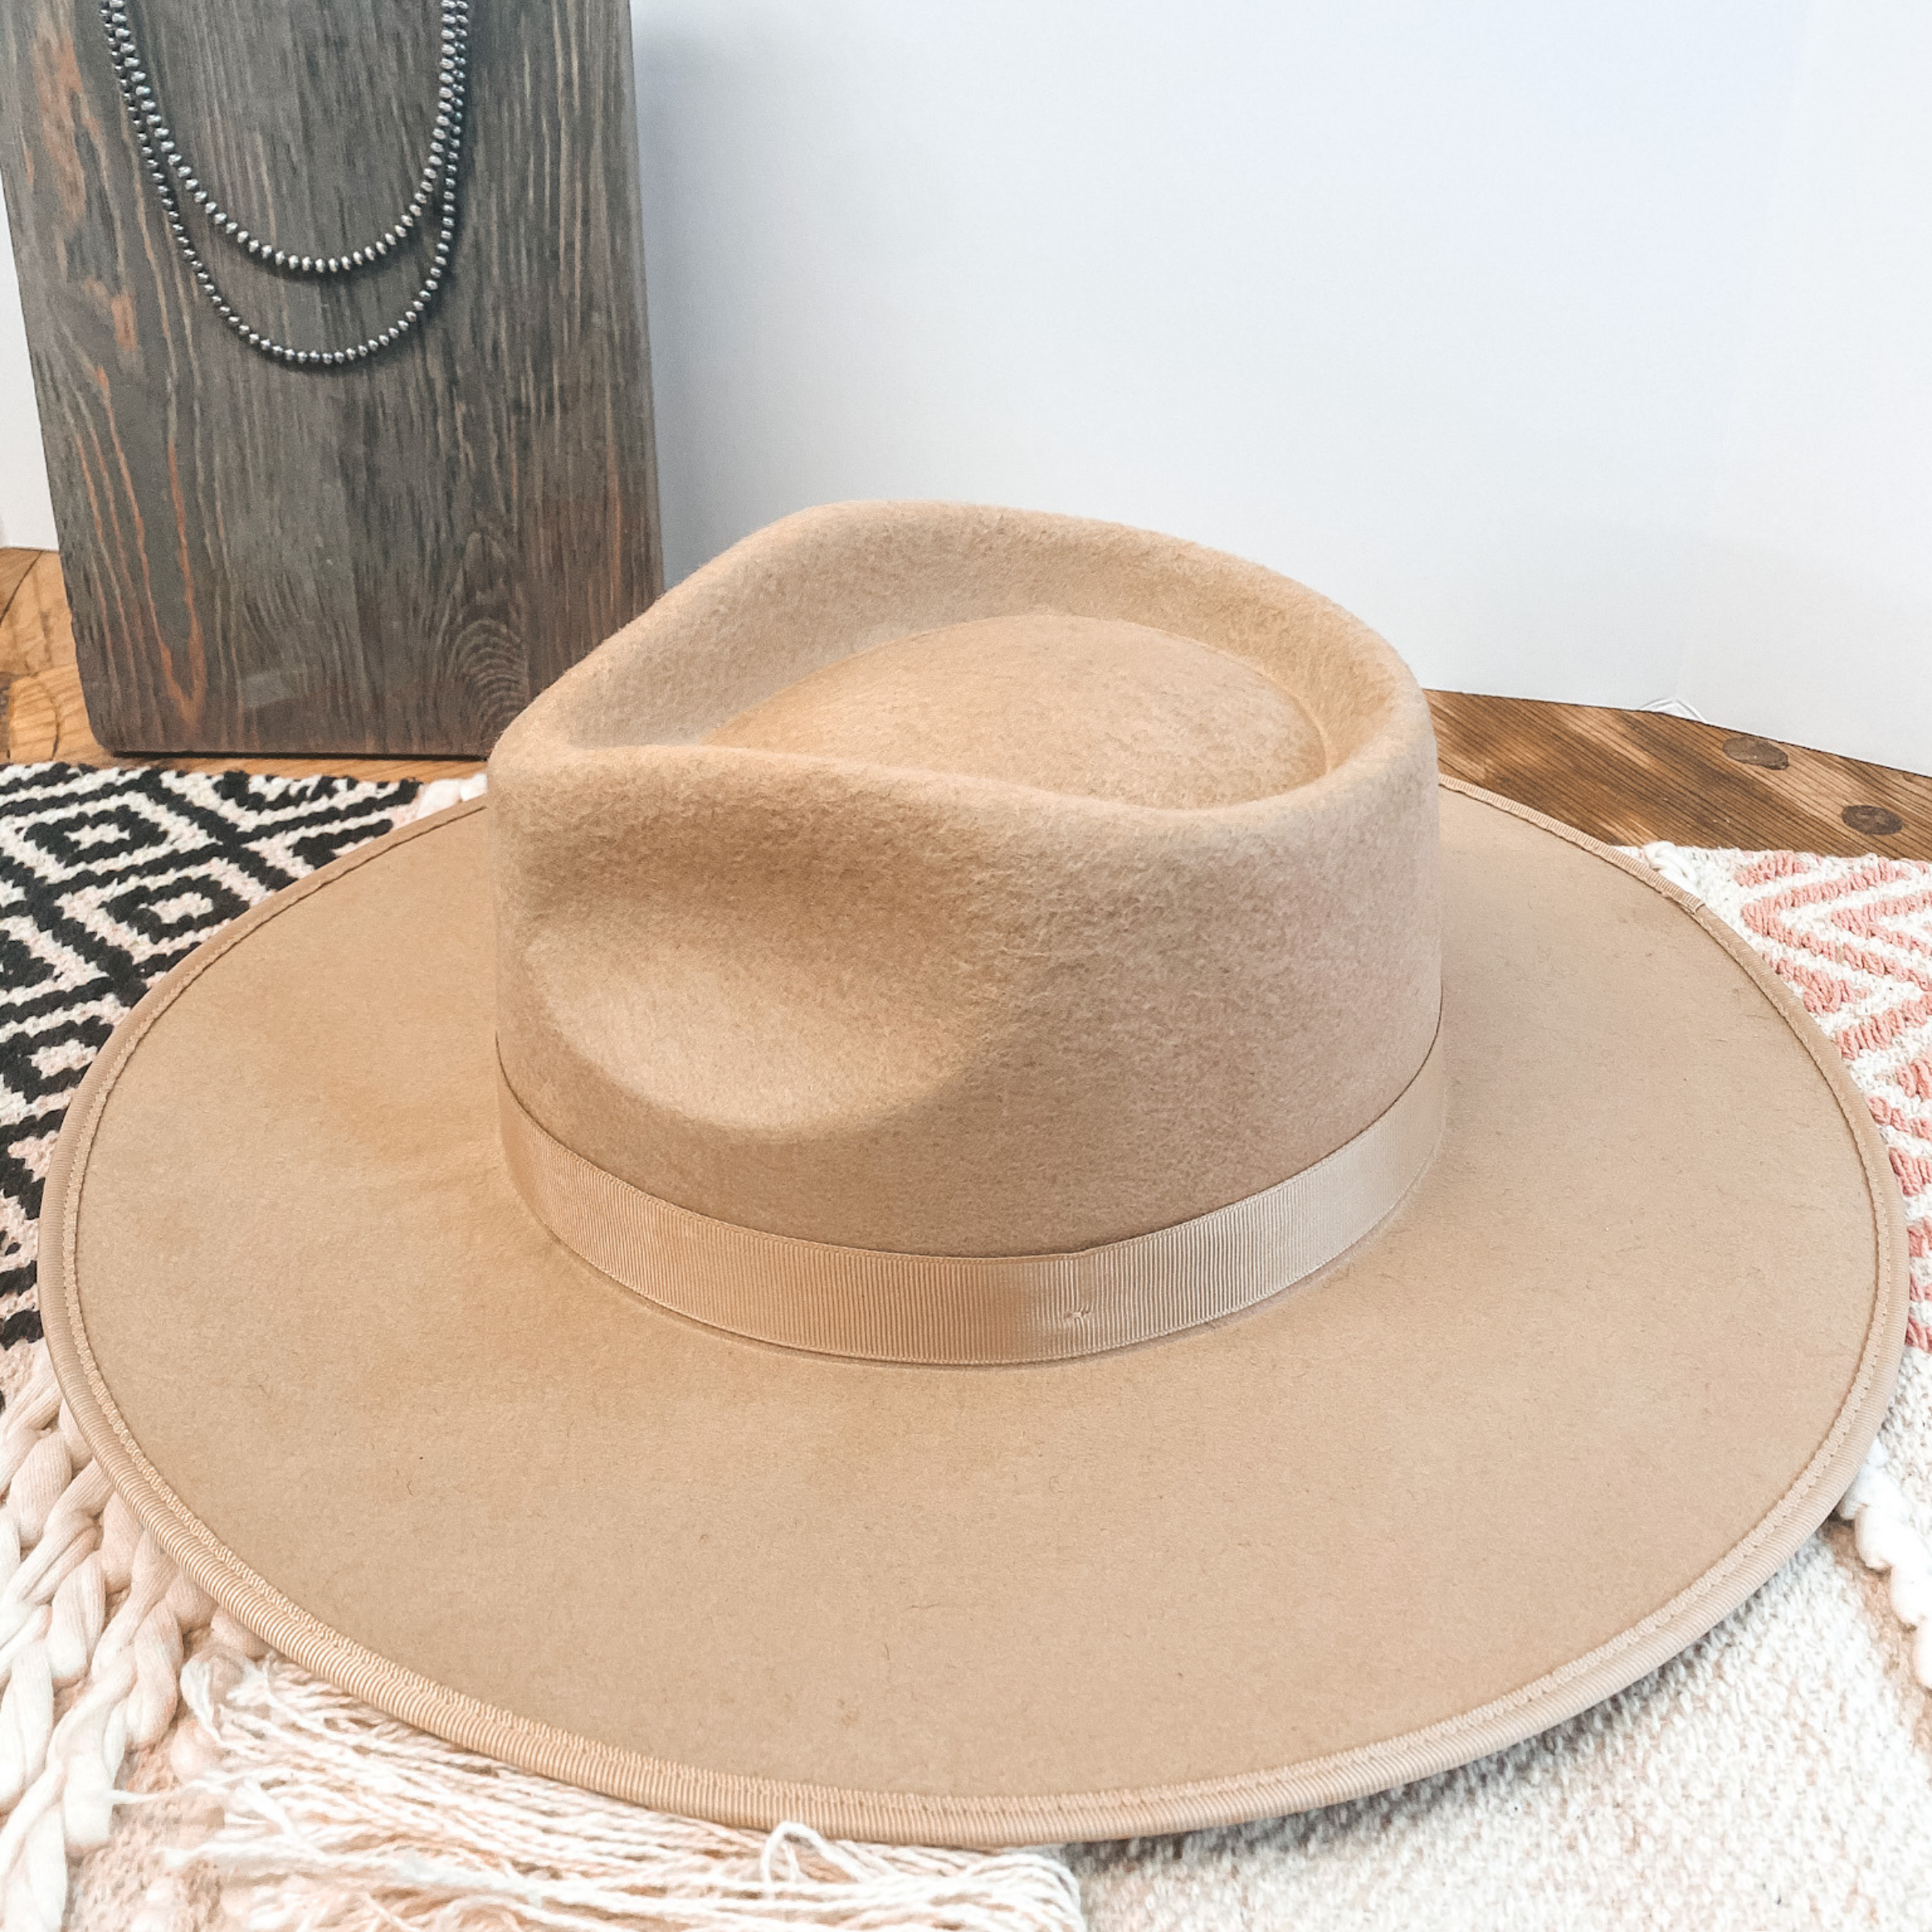 Ramblin' Road Ribbon Banded Rancher Hat in Beige - Giddy Up Glamour Boutique